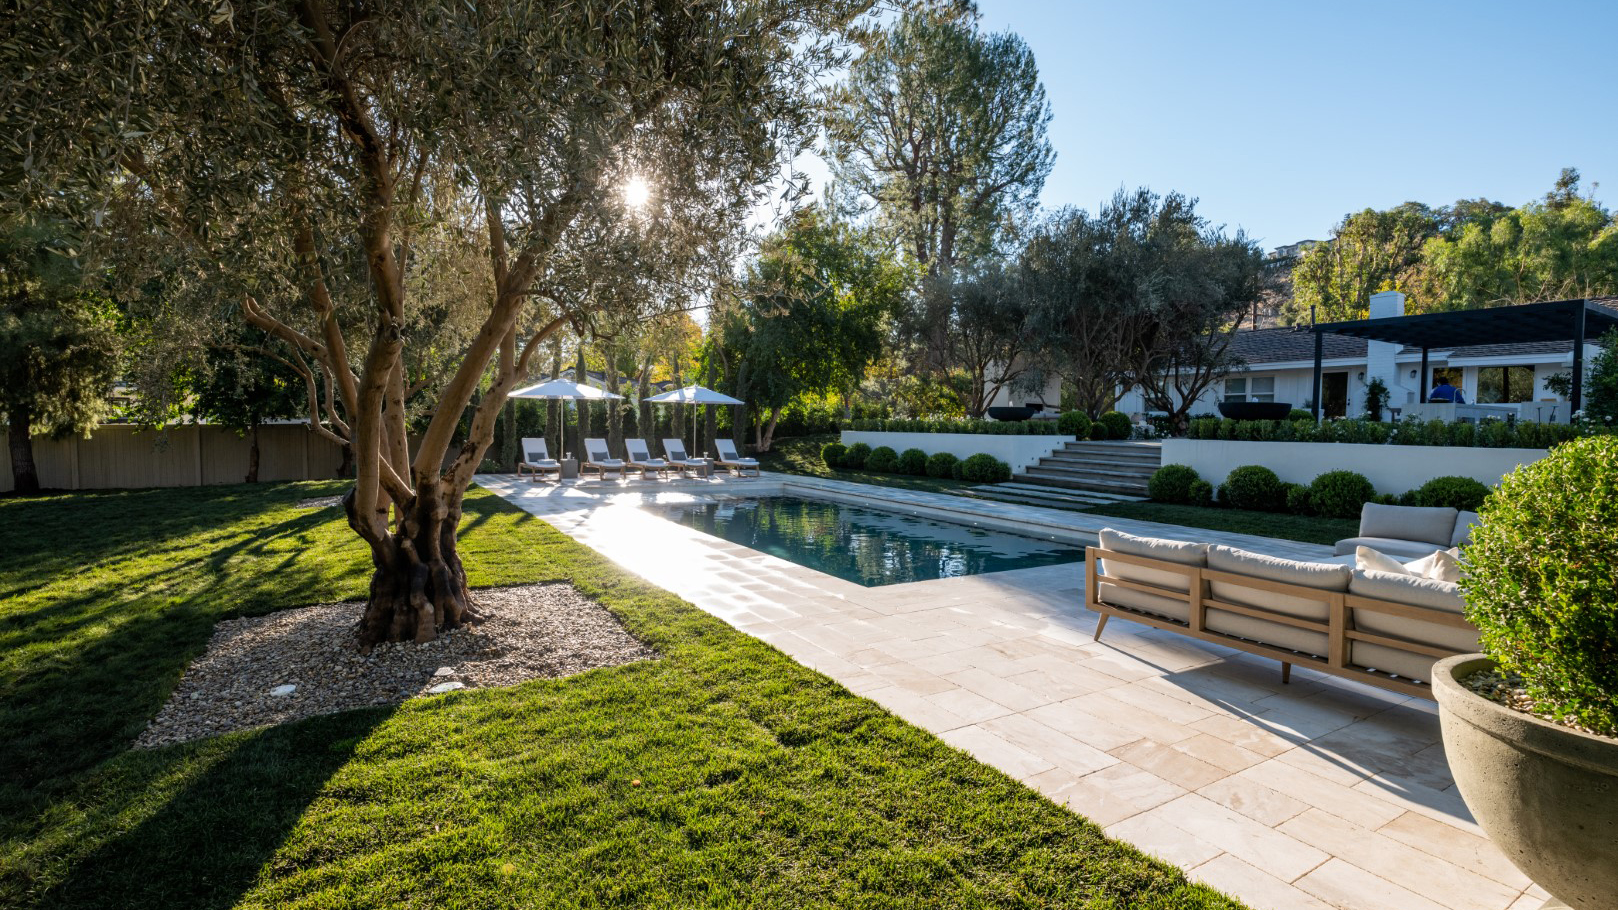 The backyard after renovations by Drew and Jonathan Scott with Kris Jenner and Kim Kardashian, as seen on Celebrity IOU.